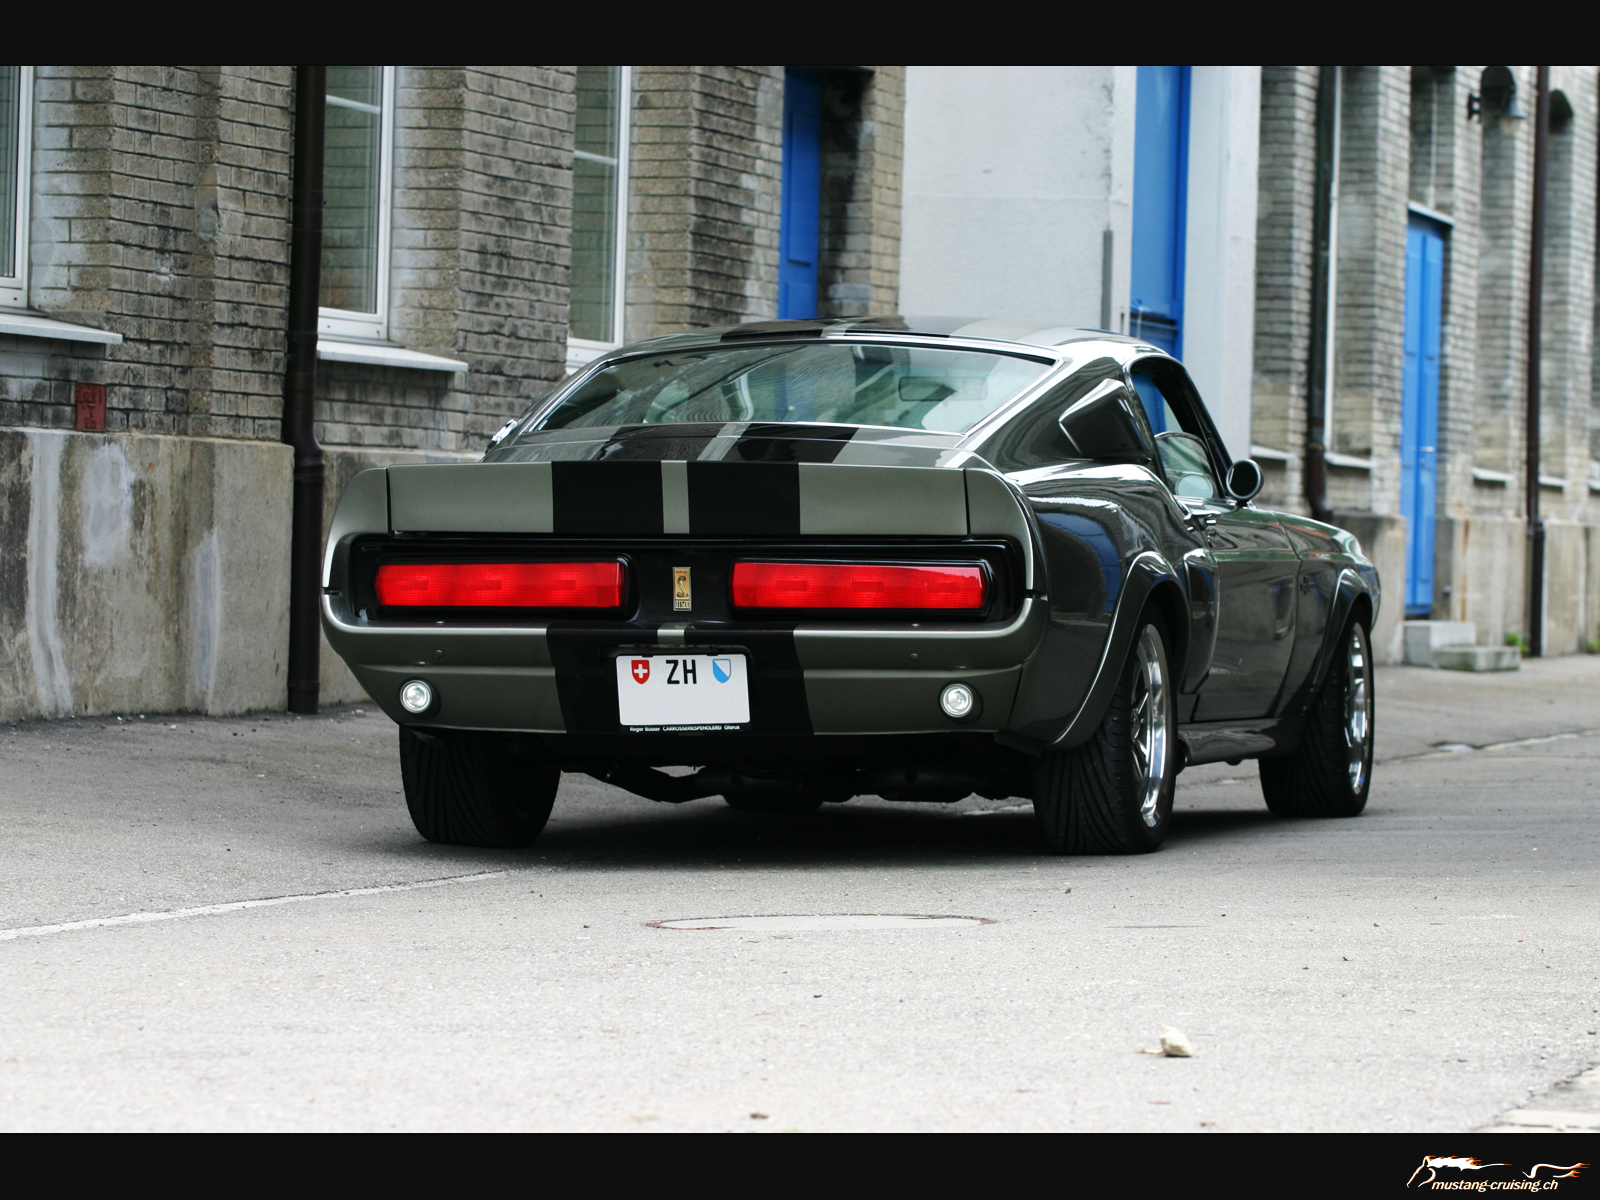 Muscle Cars Wallpaper on Cars Muscle Ford Mustang Shelby Gt500 Classic Car Hd Wallpaper Of Cars